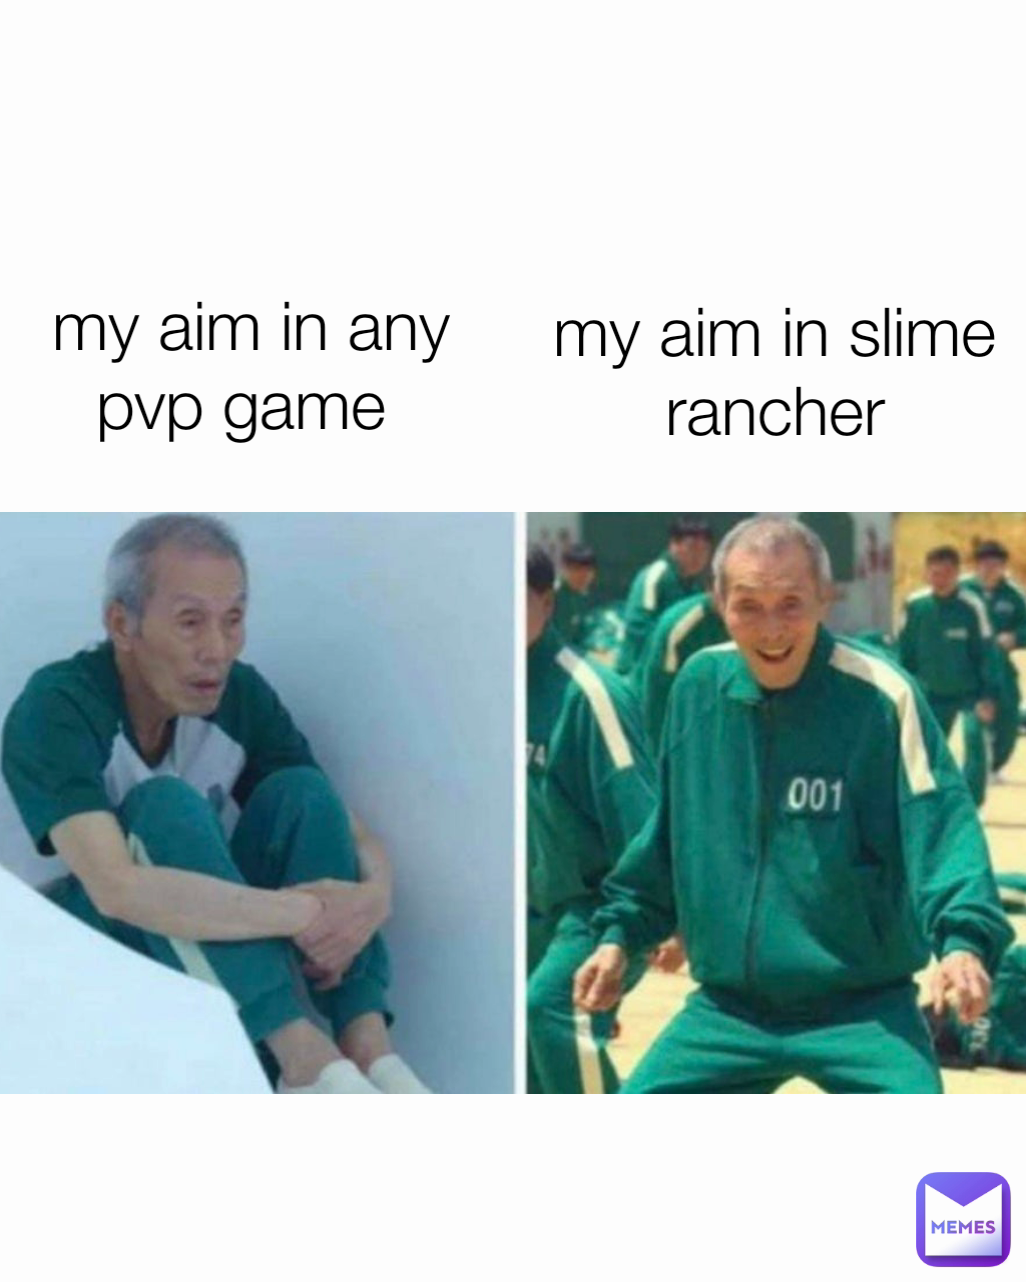 my aim in slime rancher my aim in any pvp game 